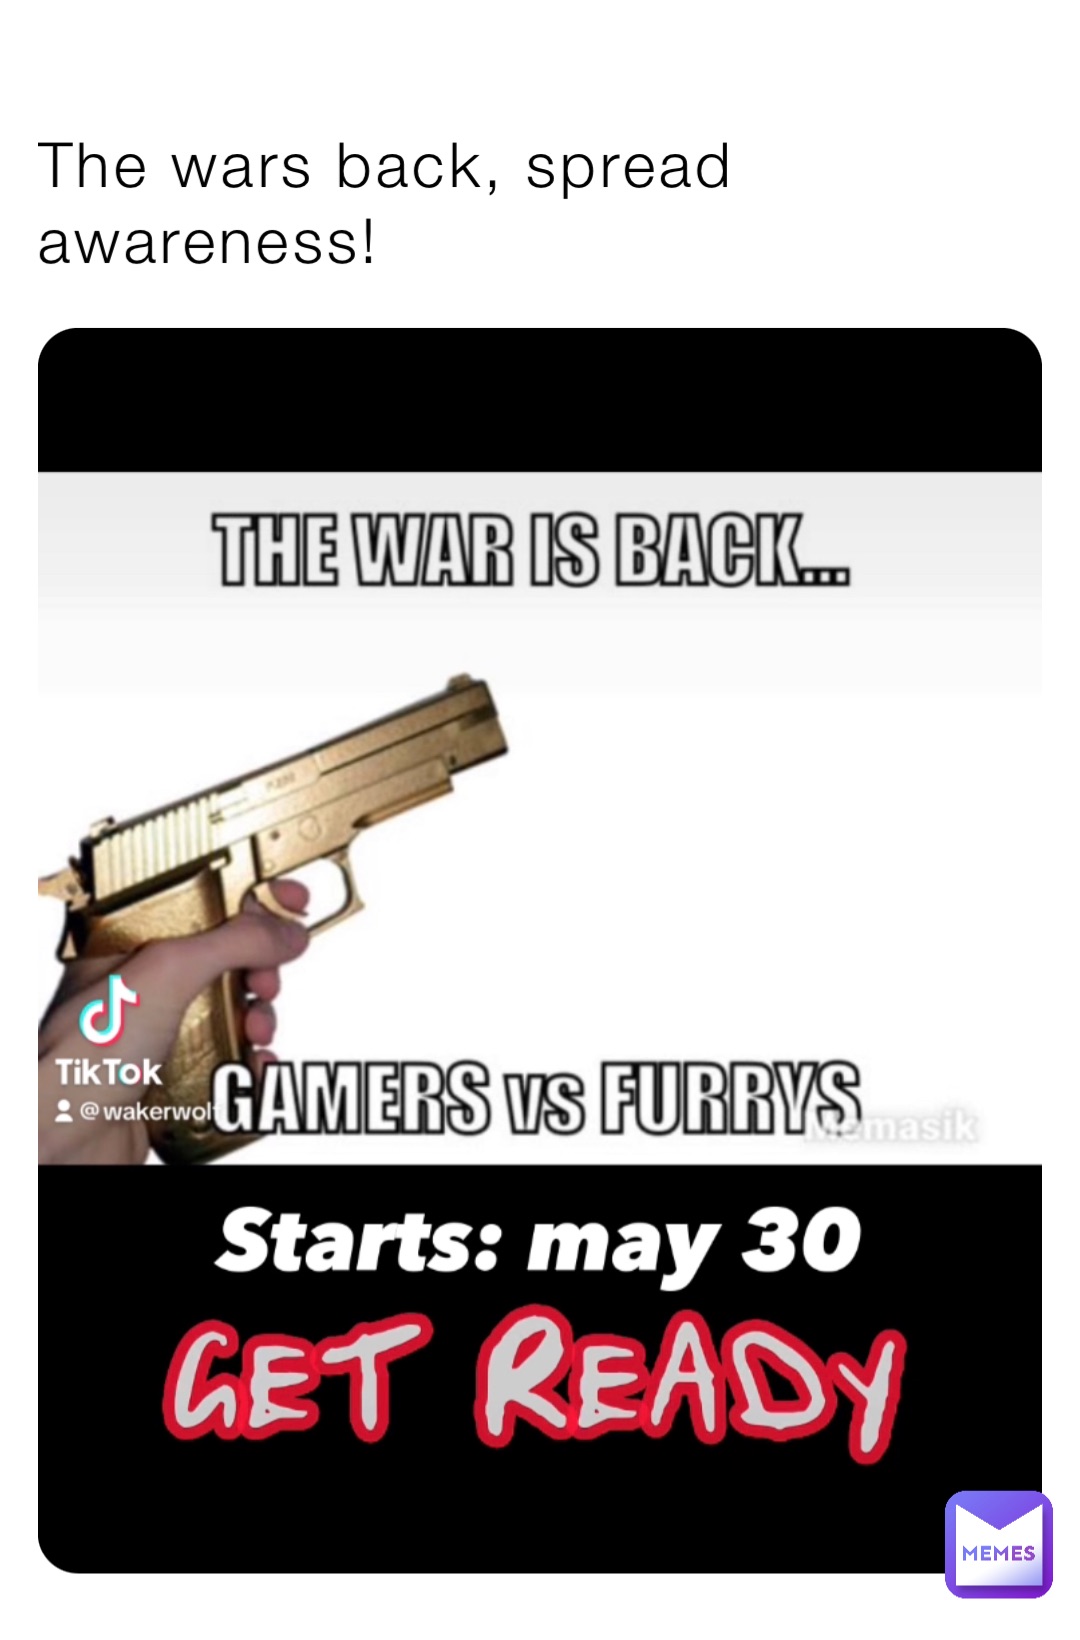 The wars back, spread awareness!